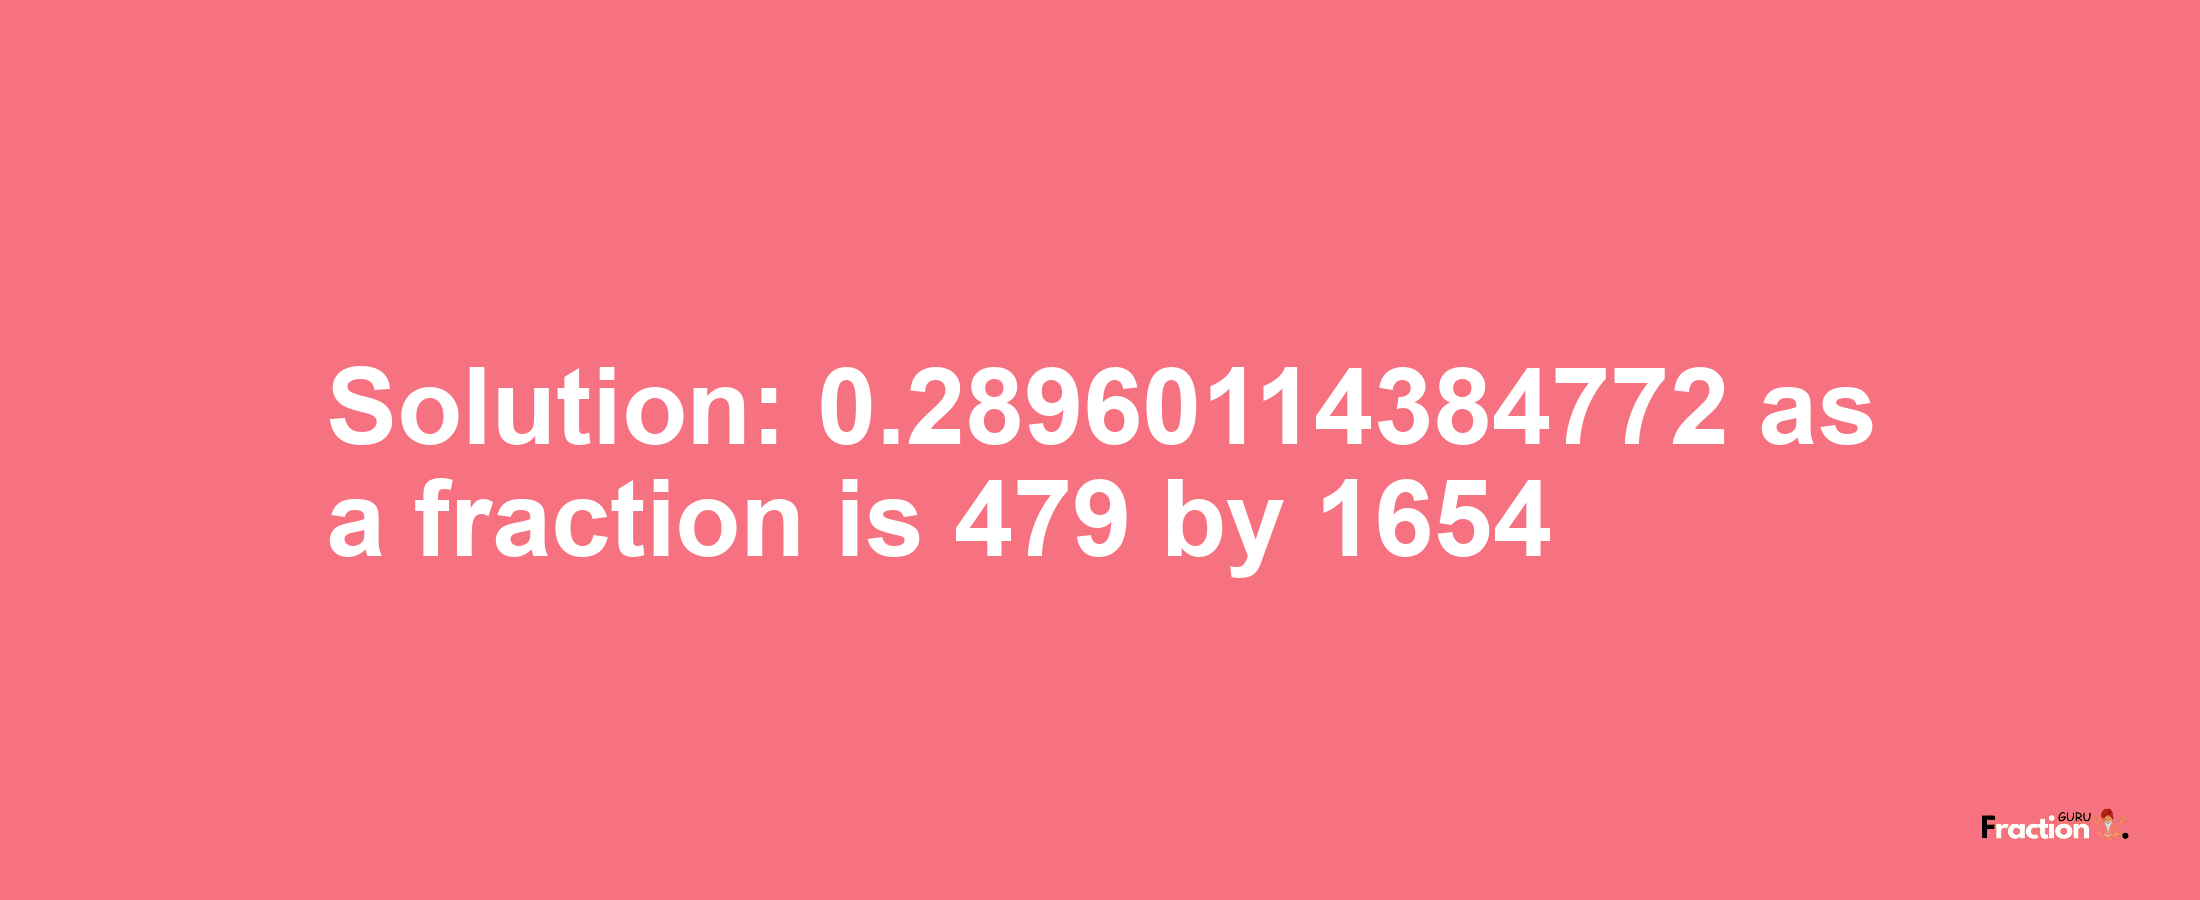 Solution:0.28960114384772 as a fraction is 479/1654